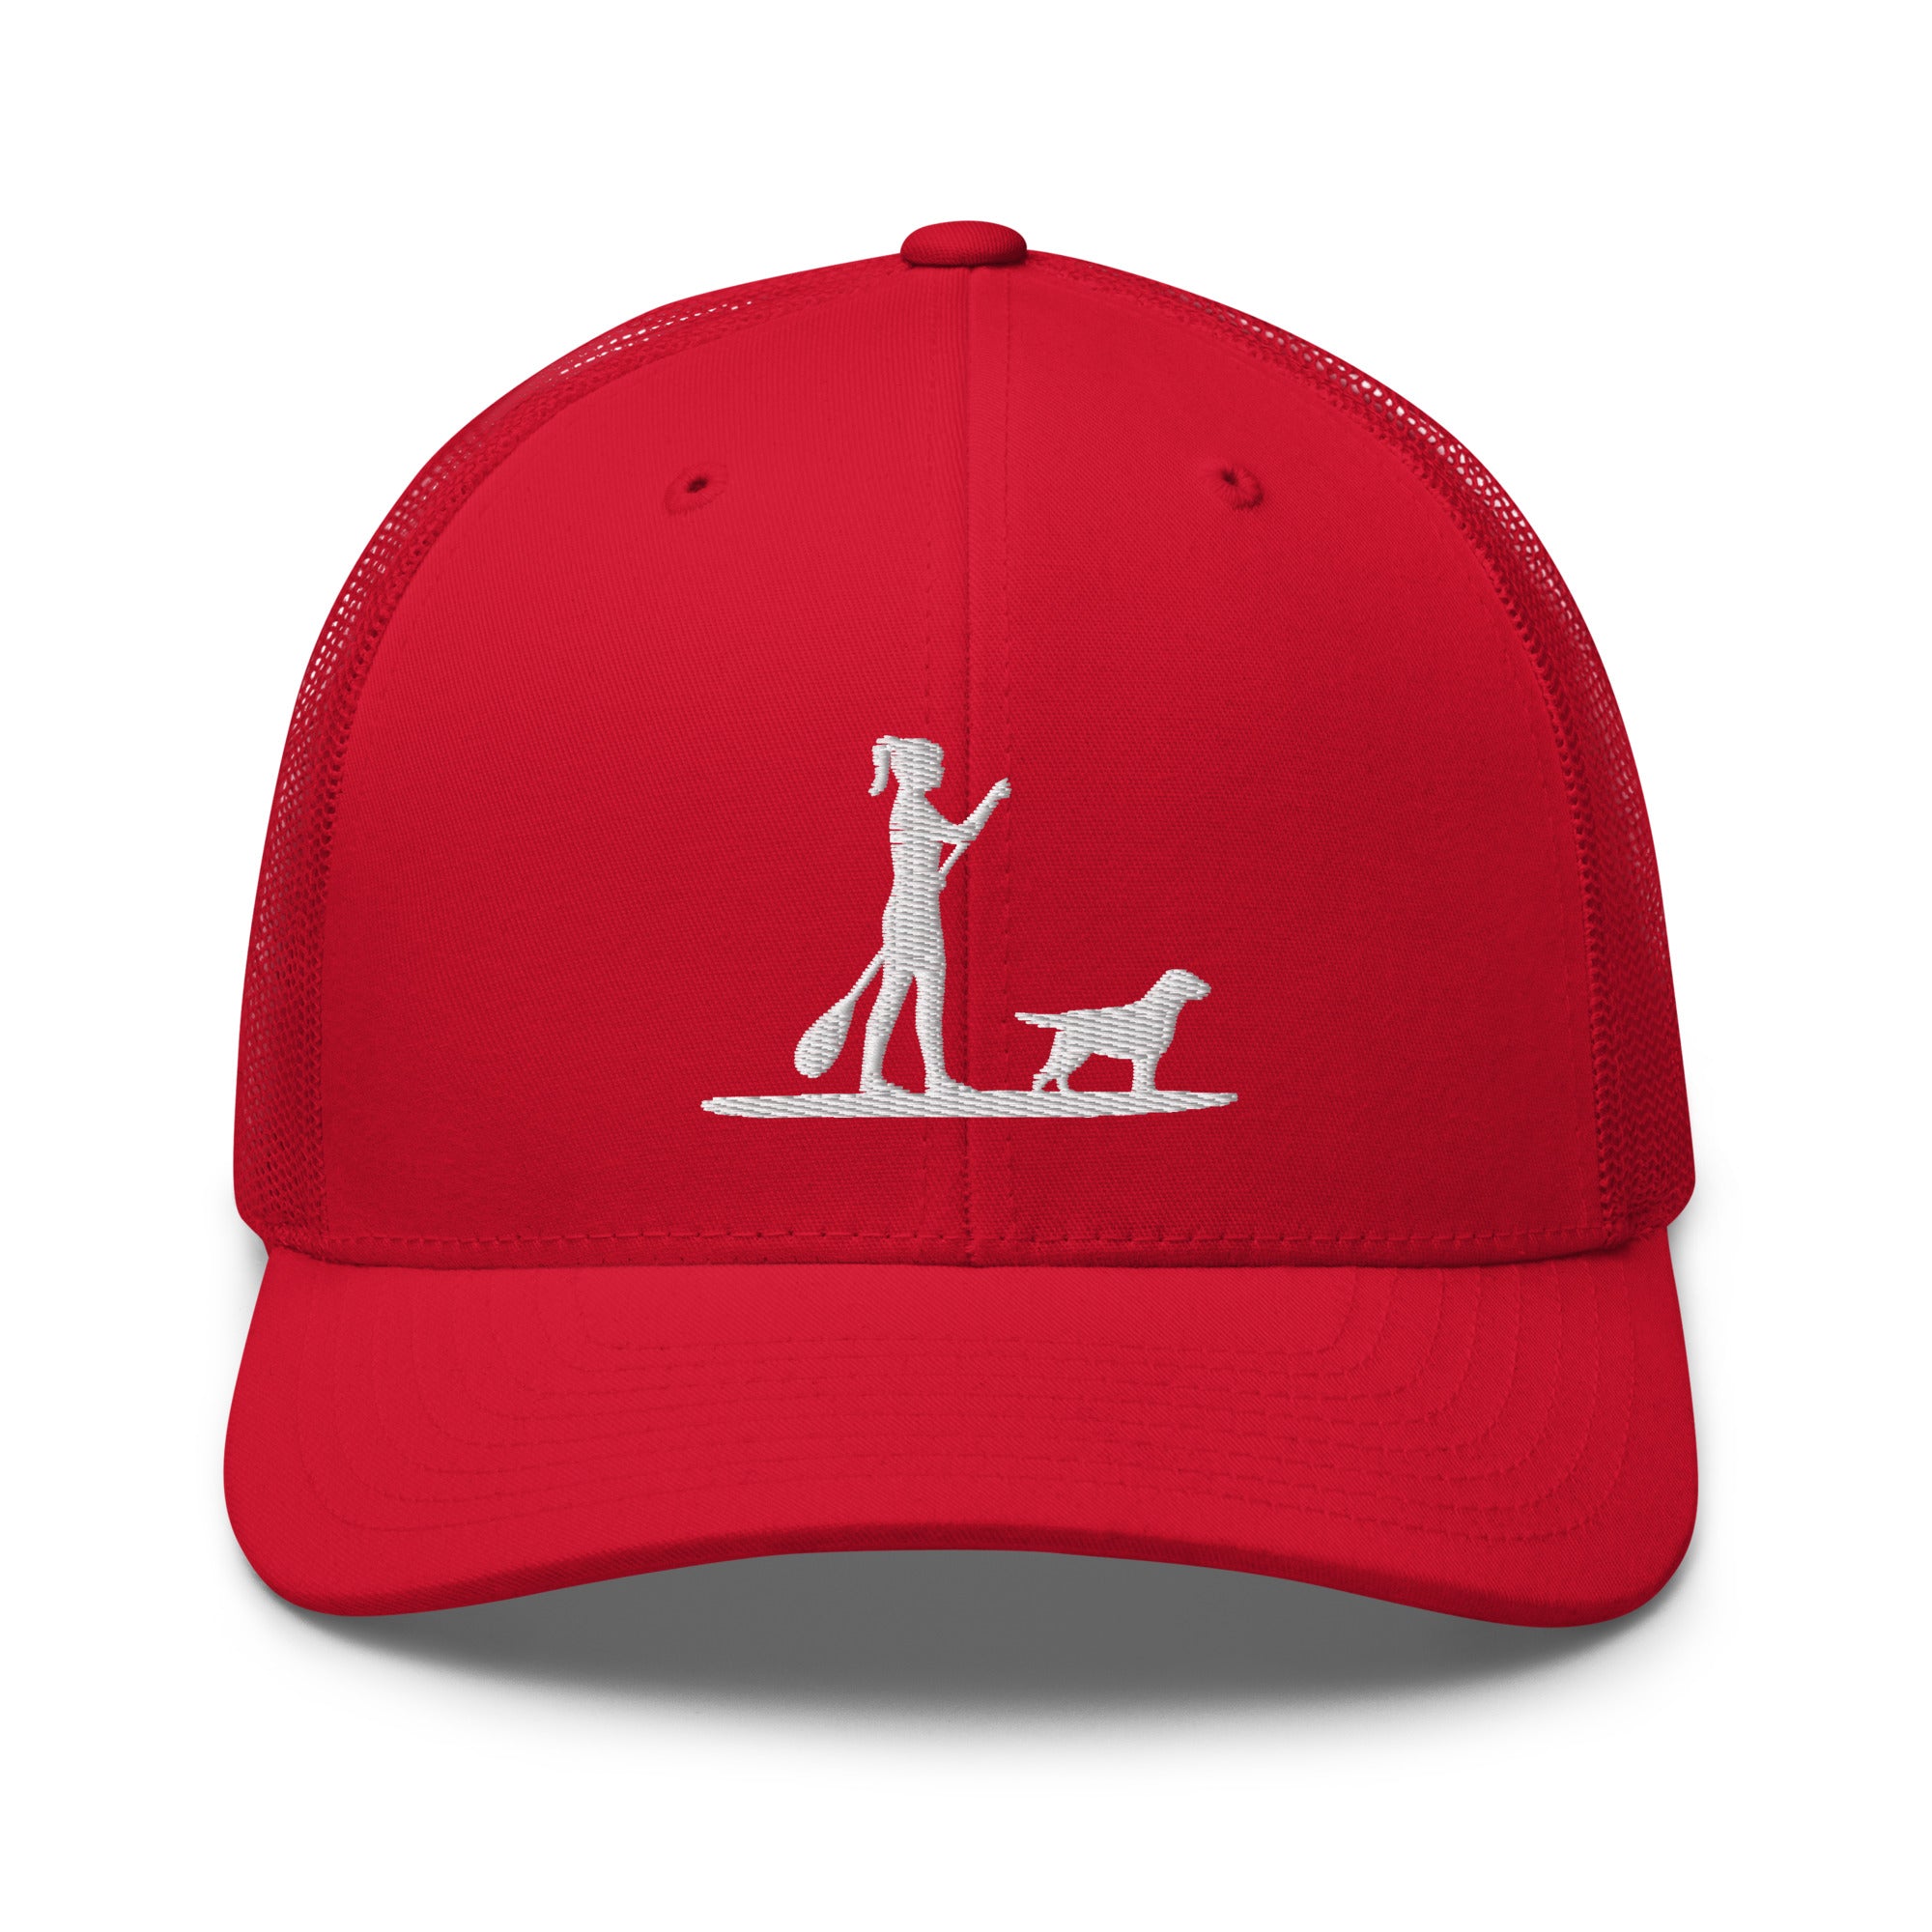 Paddle Board and Dog Heartbeat Mesh Cap